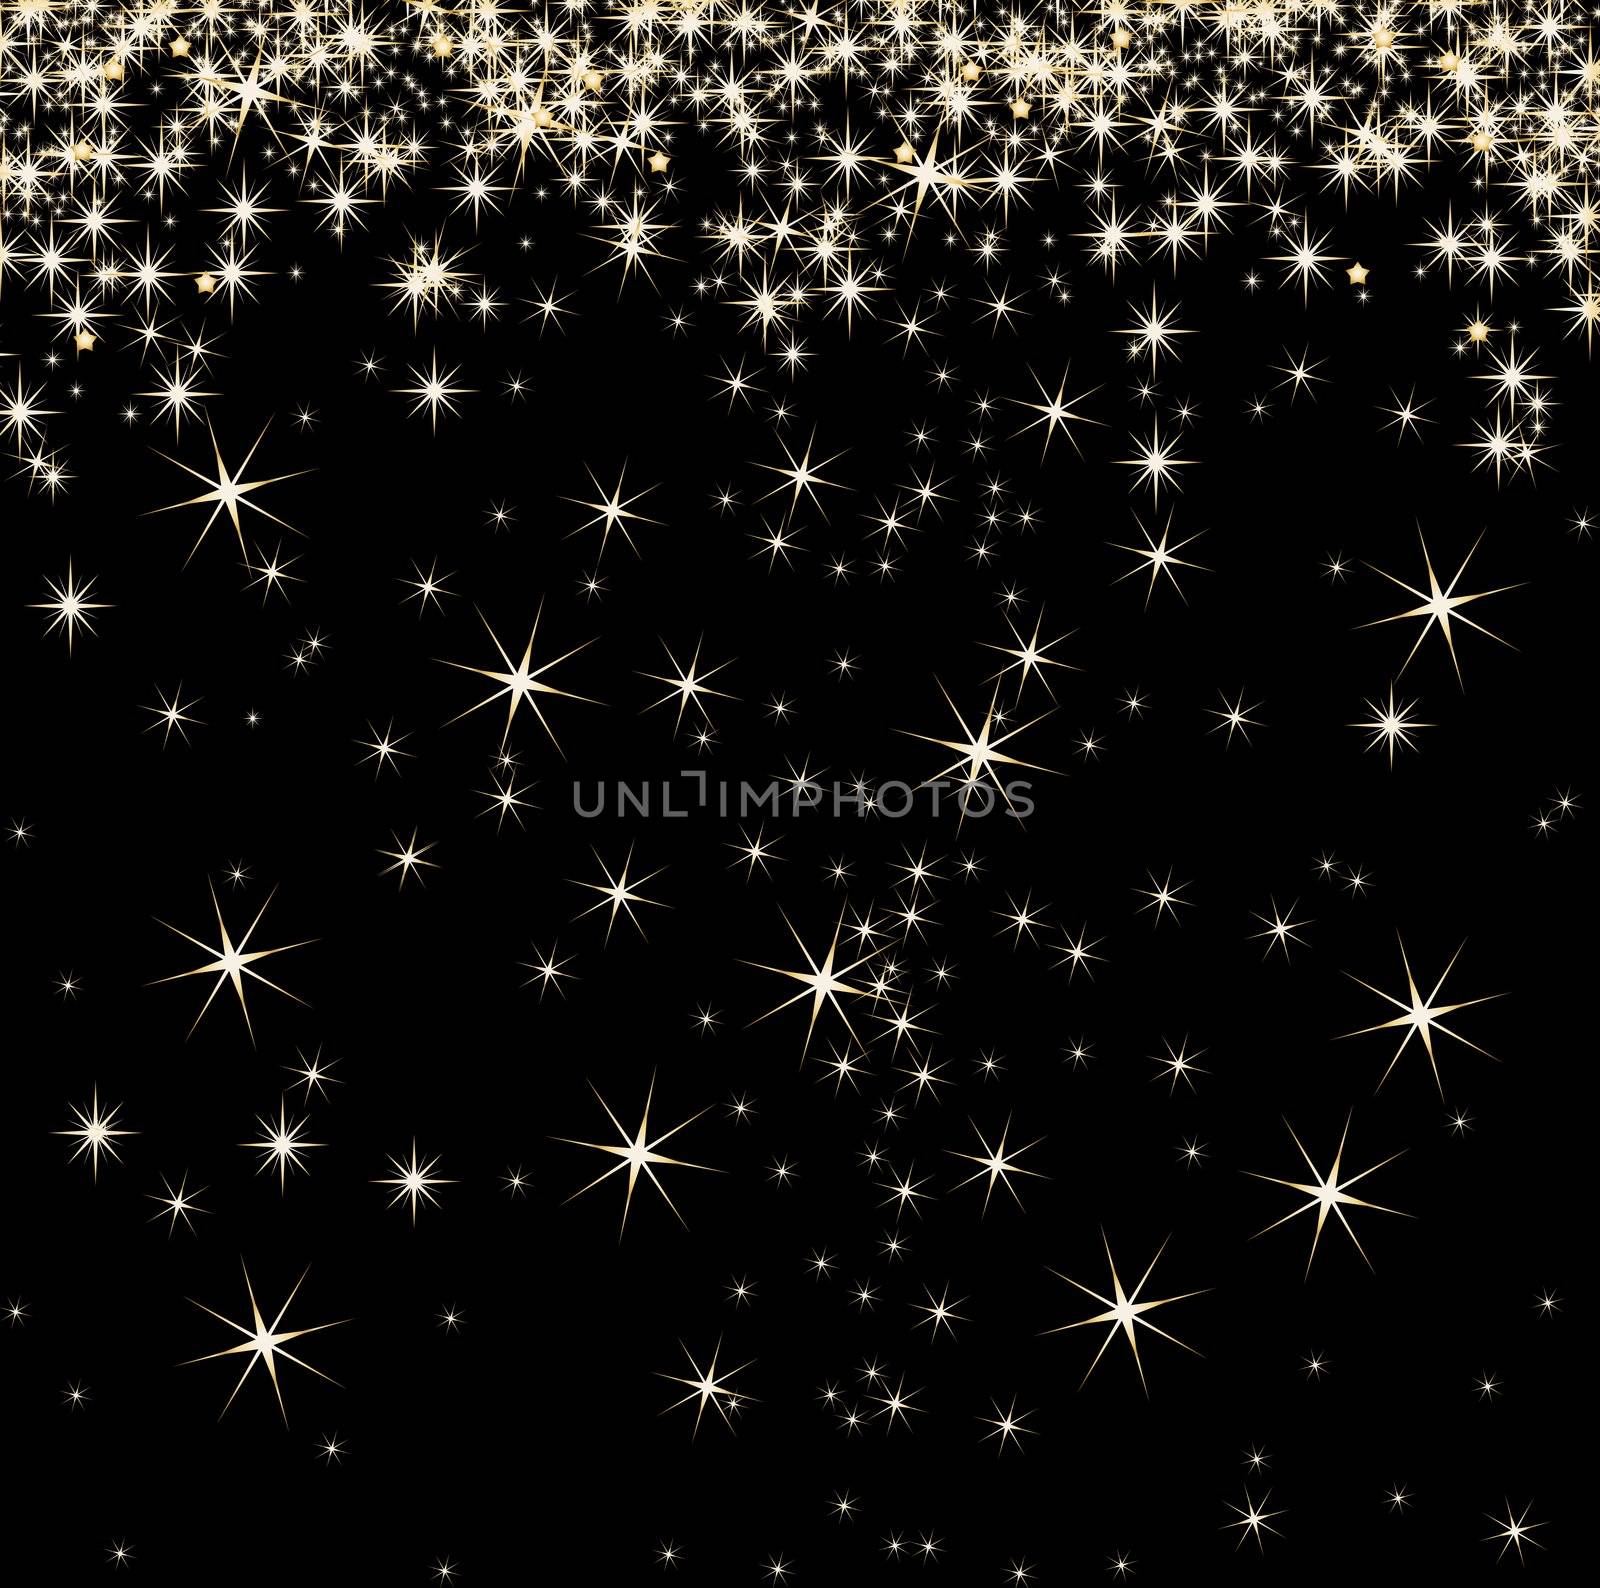 Stars on background by peromarketing